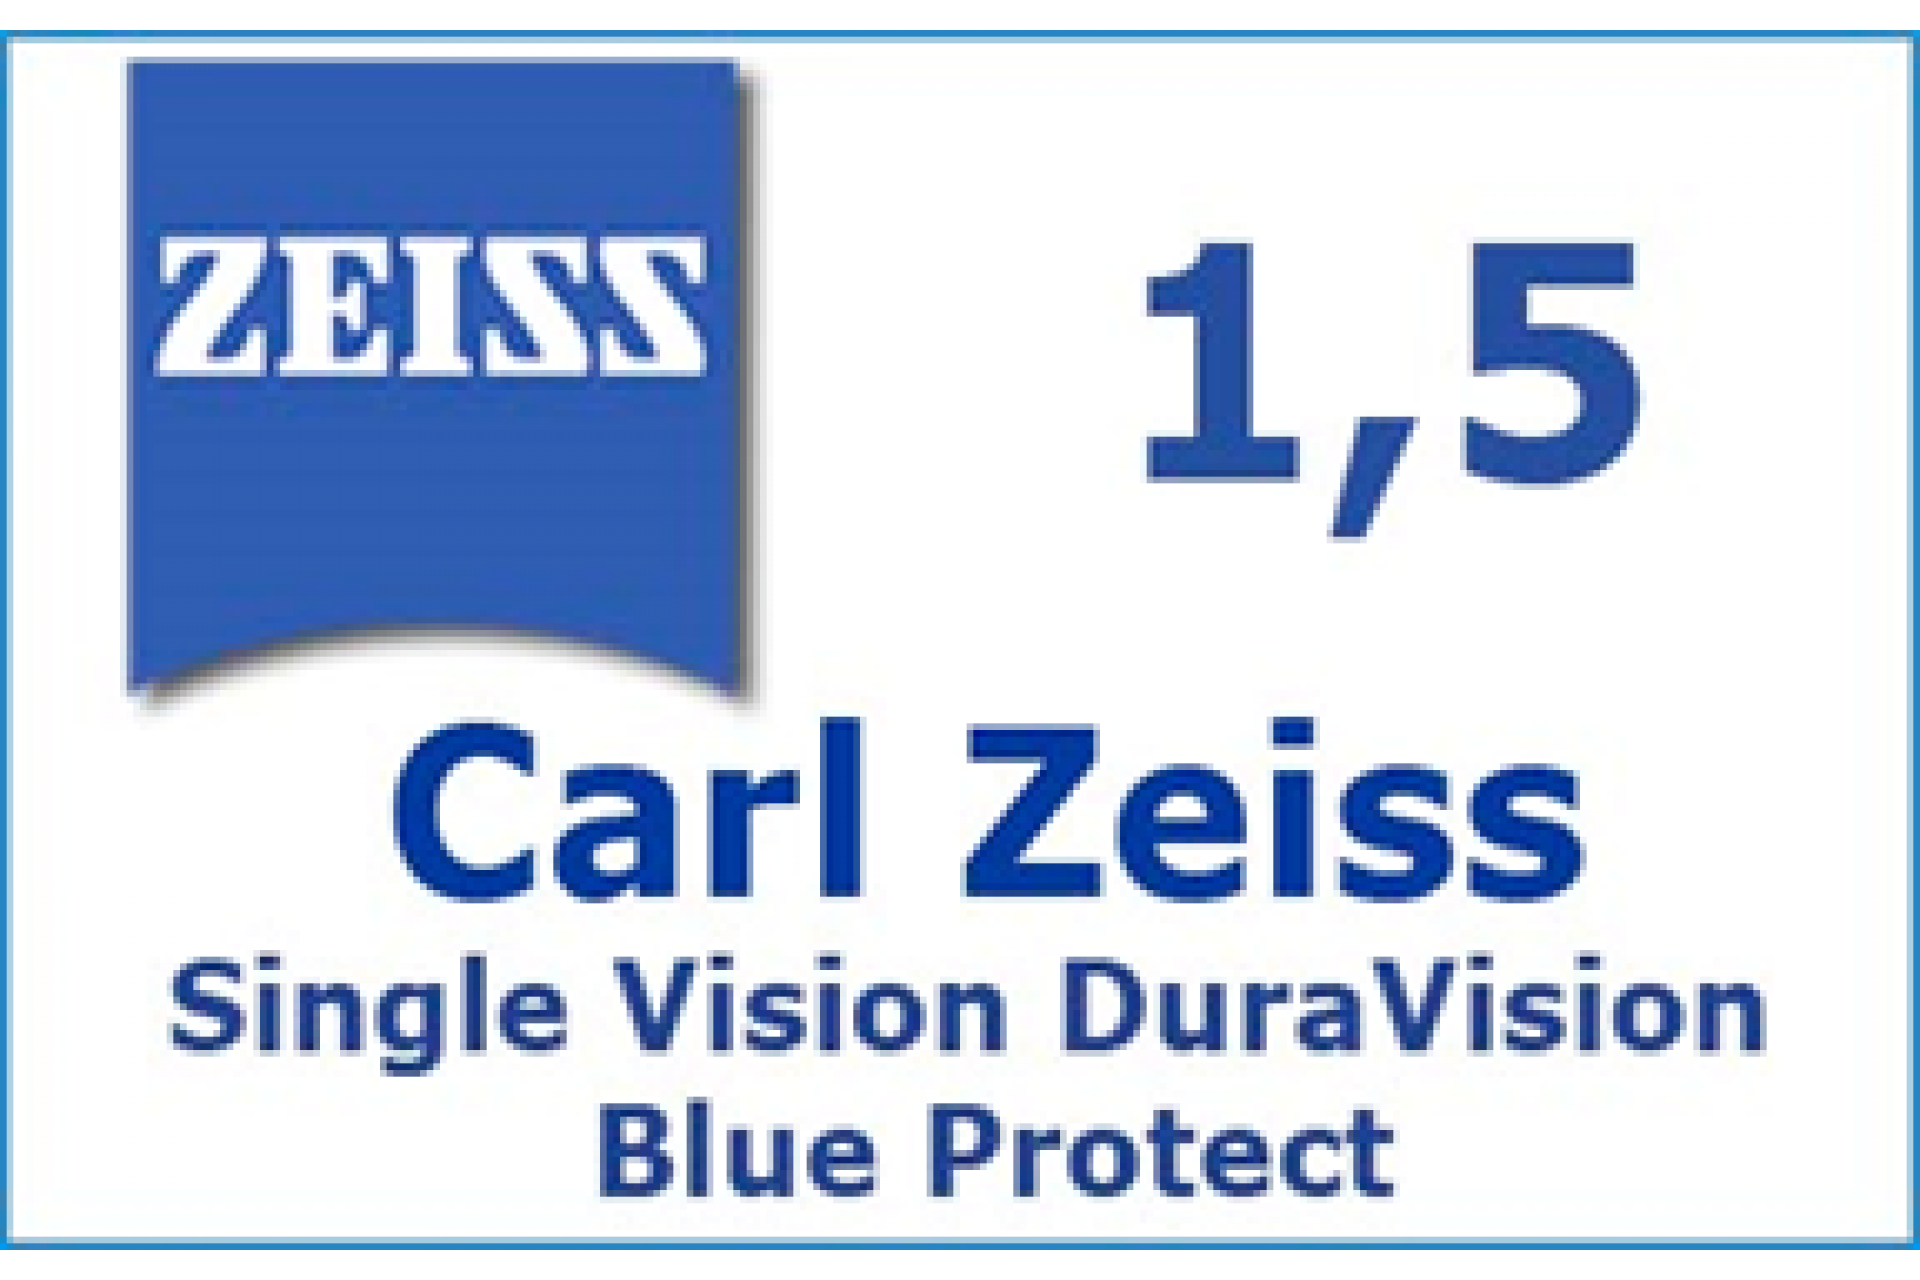 Single vision. Линзы Zeiss Blue protect для очков. Zeiss Single Vision as 1.6. Zeiss Single Vision 1.5 DVBP - dura Vision Blue protect UV. Очковые линзы Zeiss Single Vision.